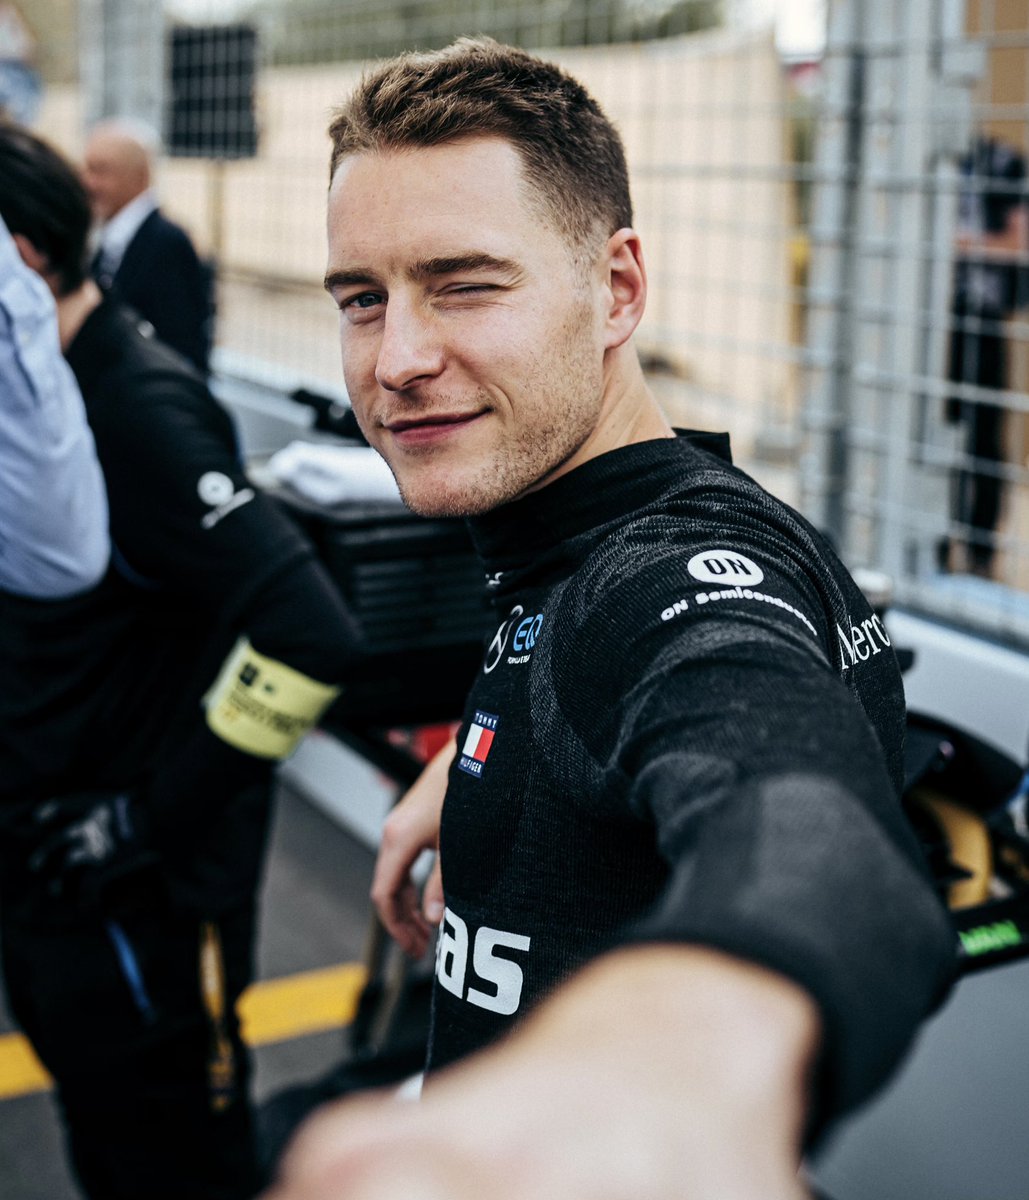 FE 🤝 F1 Excited to have the @MercedesEQFE boys taking part in the post-season @F1 test in Abu Dhabi on Tuesday! ⚡️ Good to have you @nyckdevries and @svandoorne! 👊